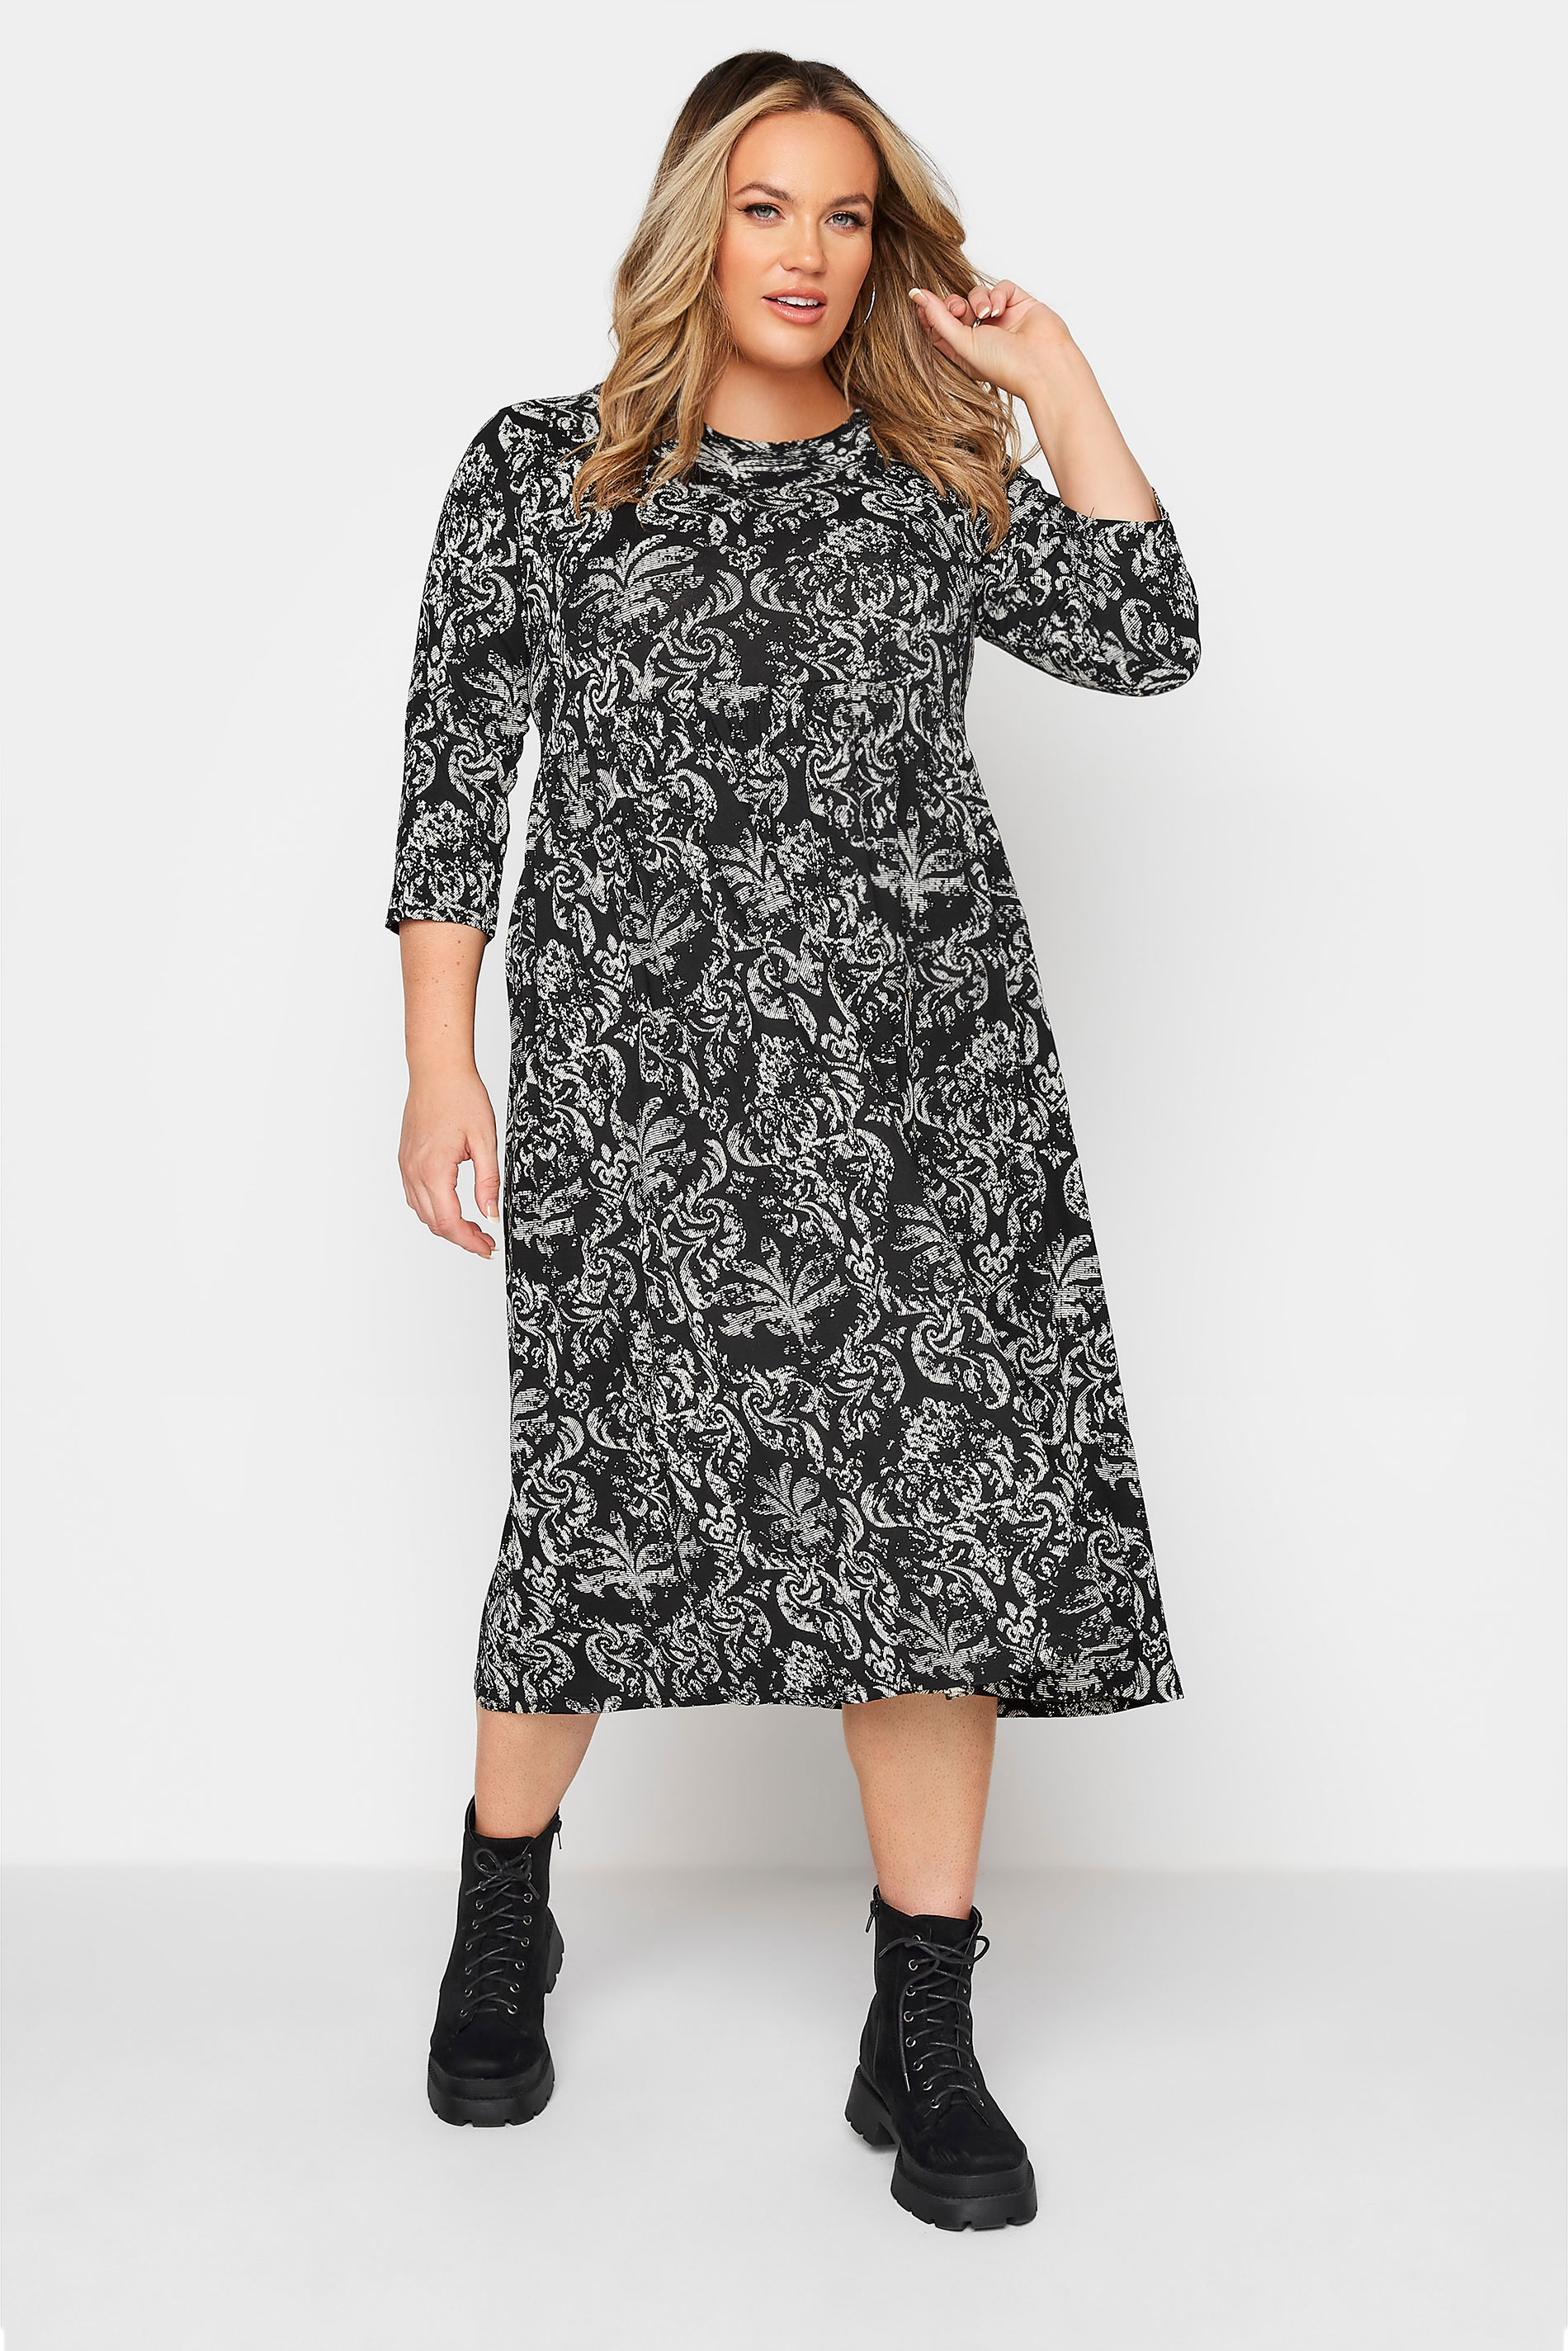 Plus Size LIMITED COLLECTION Black Paisley Print Midaxi Dress | Yours ...